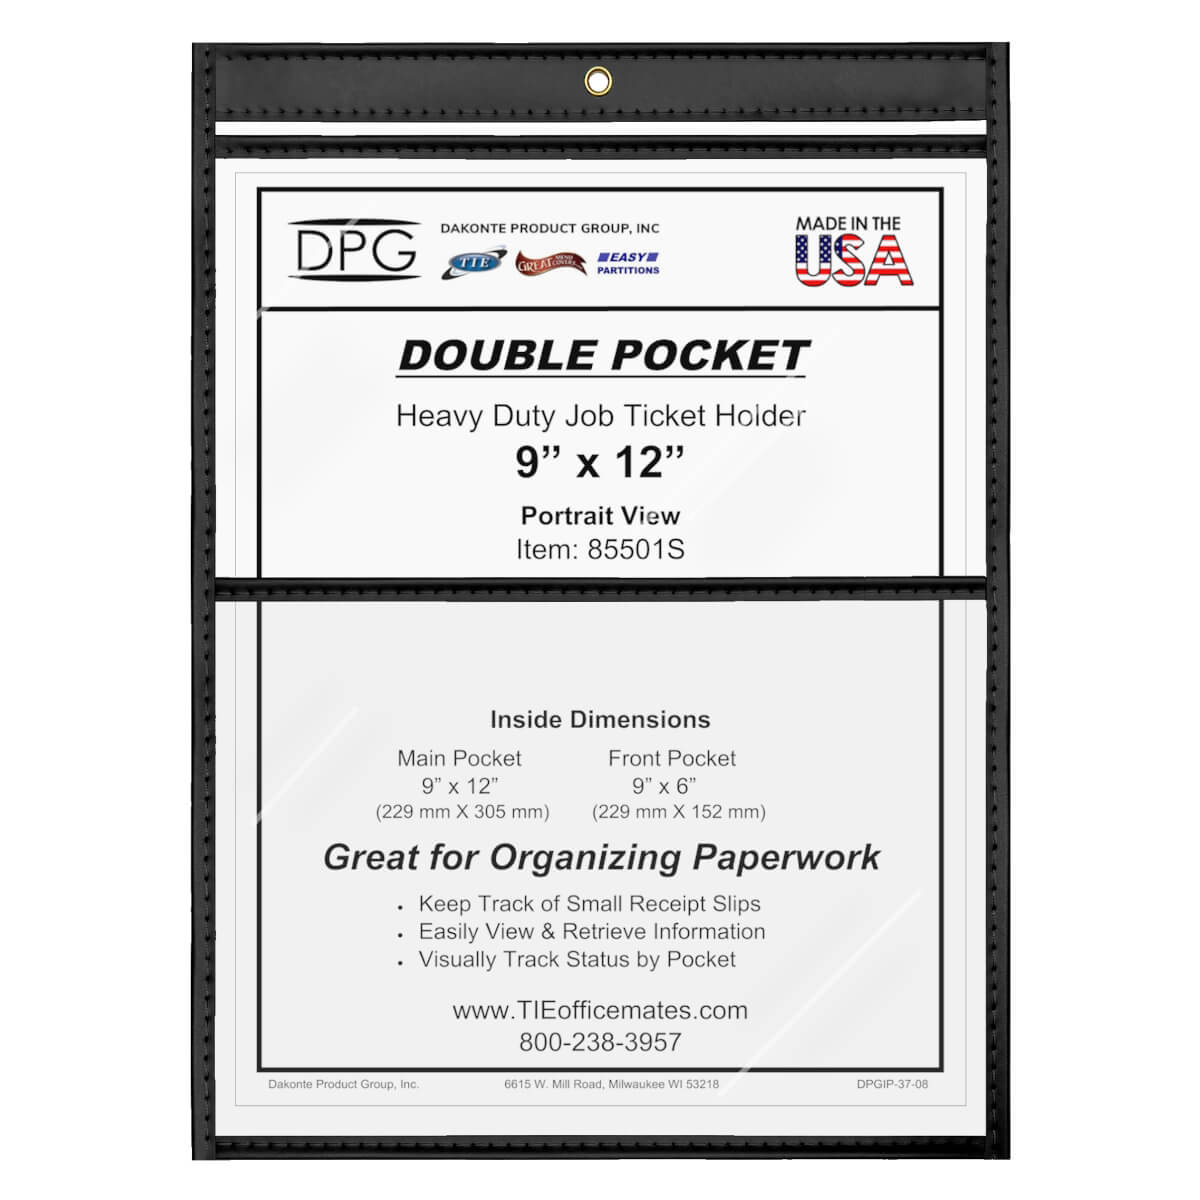 Two-pocket double pocket job ticket holders for organizing receipts, work orders, bookkeeping documents and repair service orders